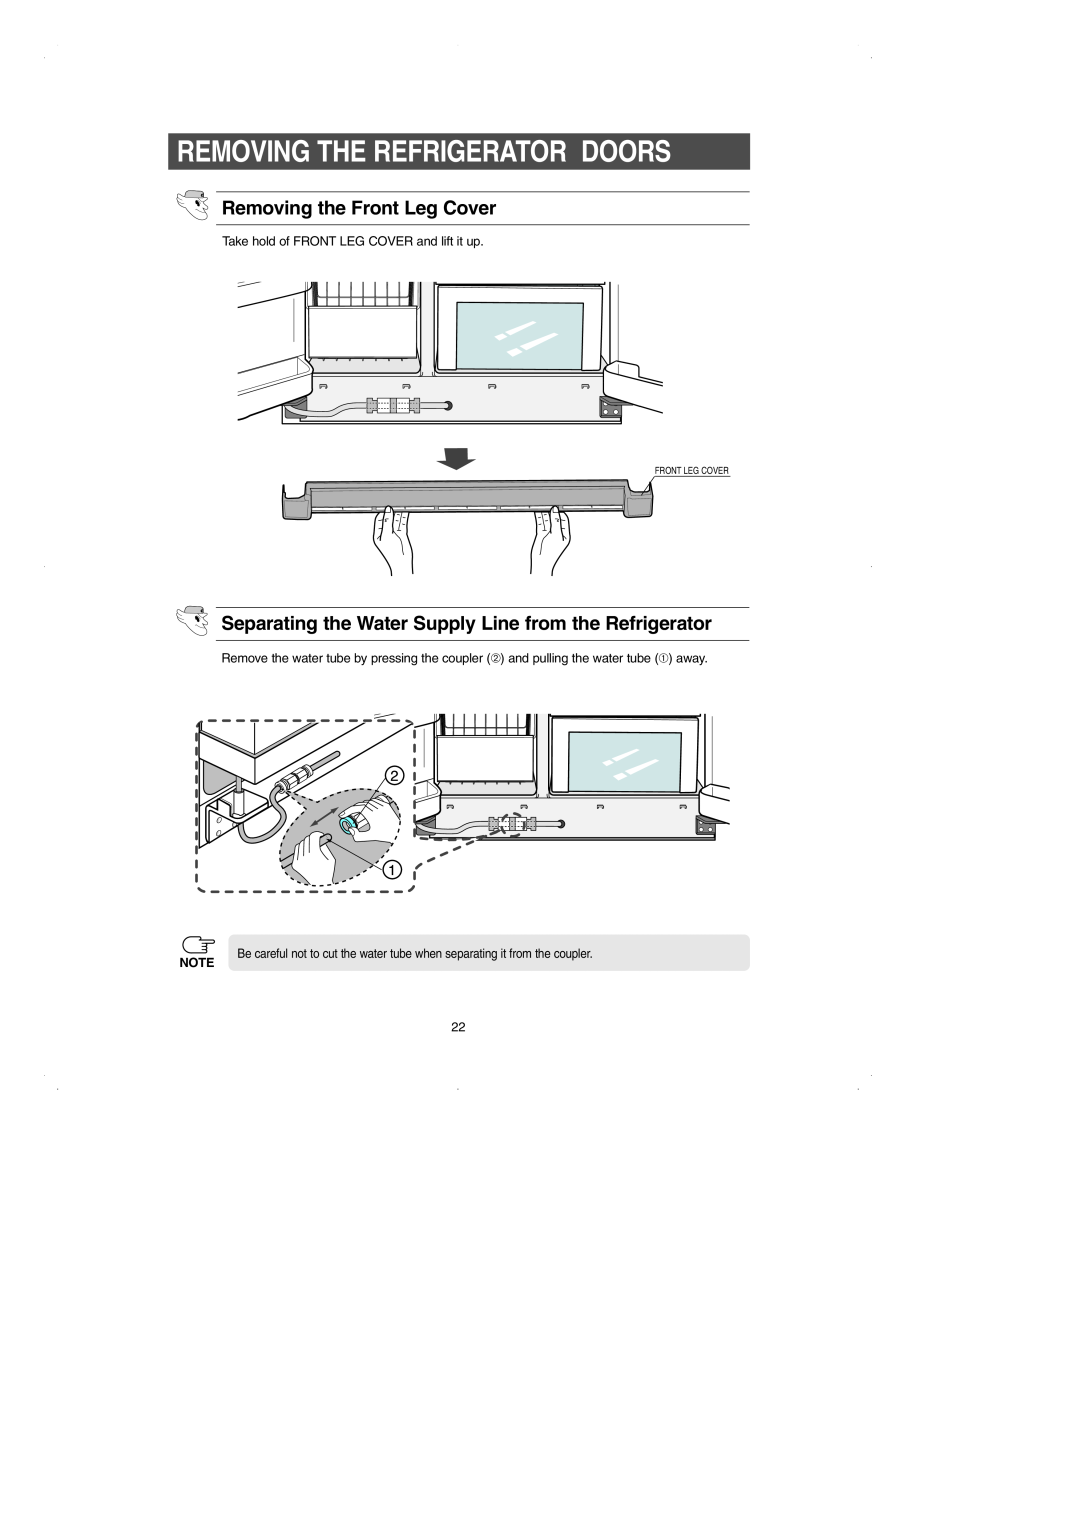 Samsung RS2531 installation instructions Removing The Refrigerator Doors, Removing the Front Leg Cover 